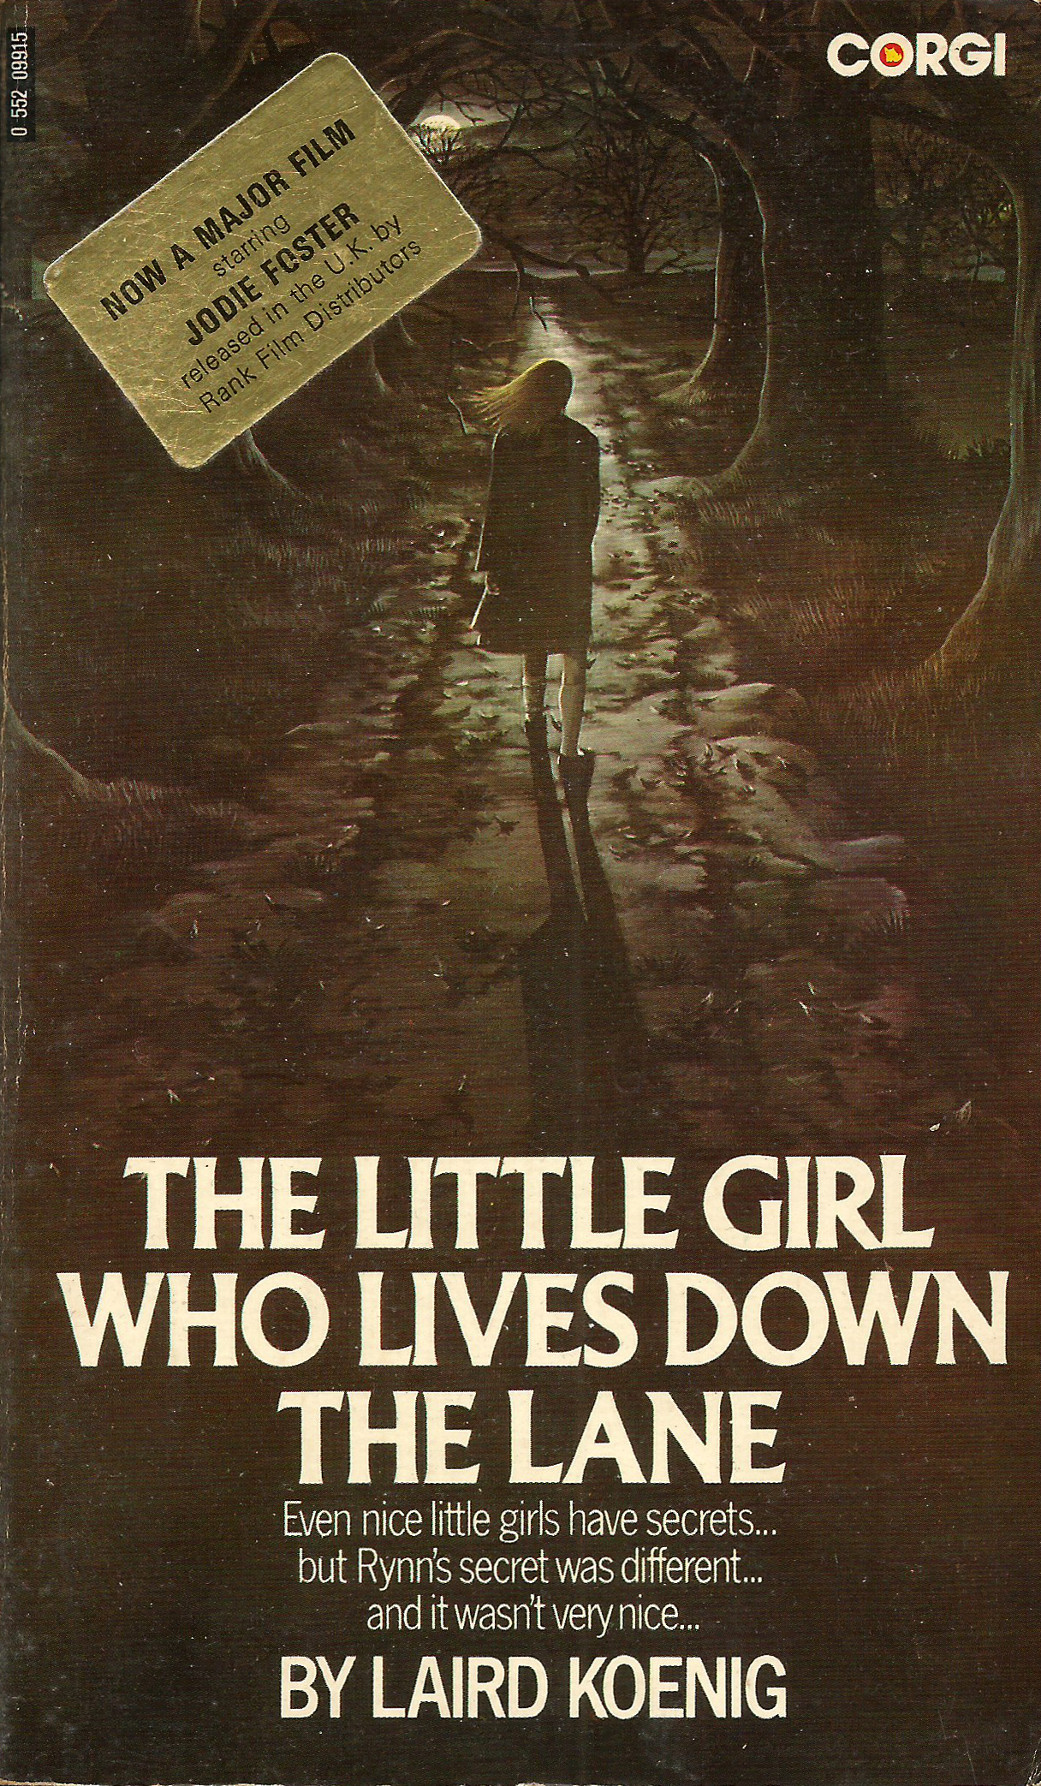 The Little Girl Who Lives Down The Lane, by Laird Koenig (Corgi, 1975).From a charity